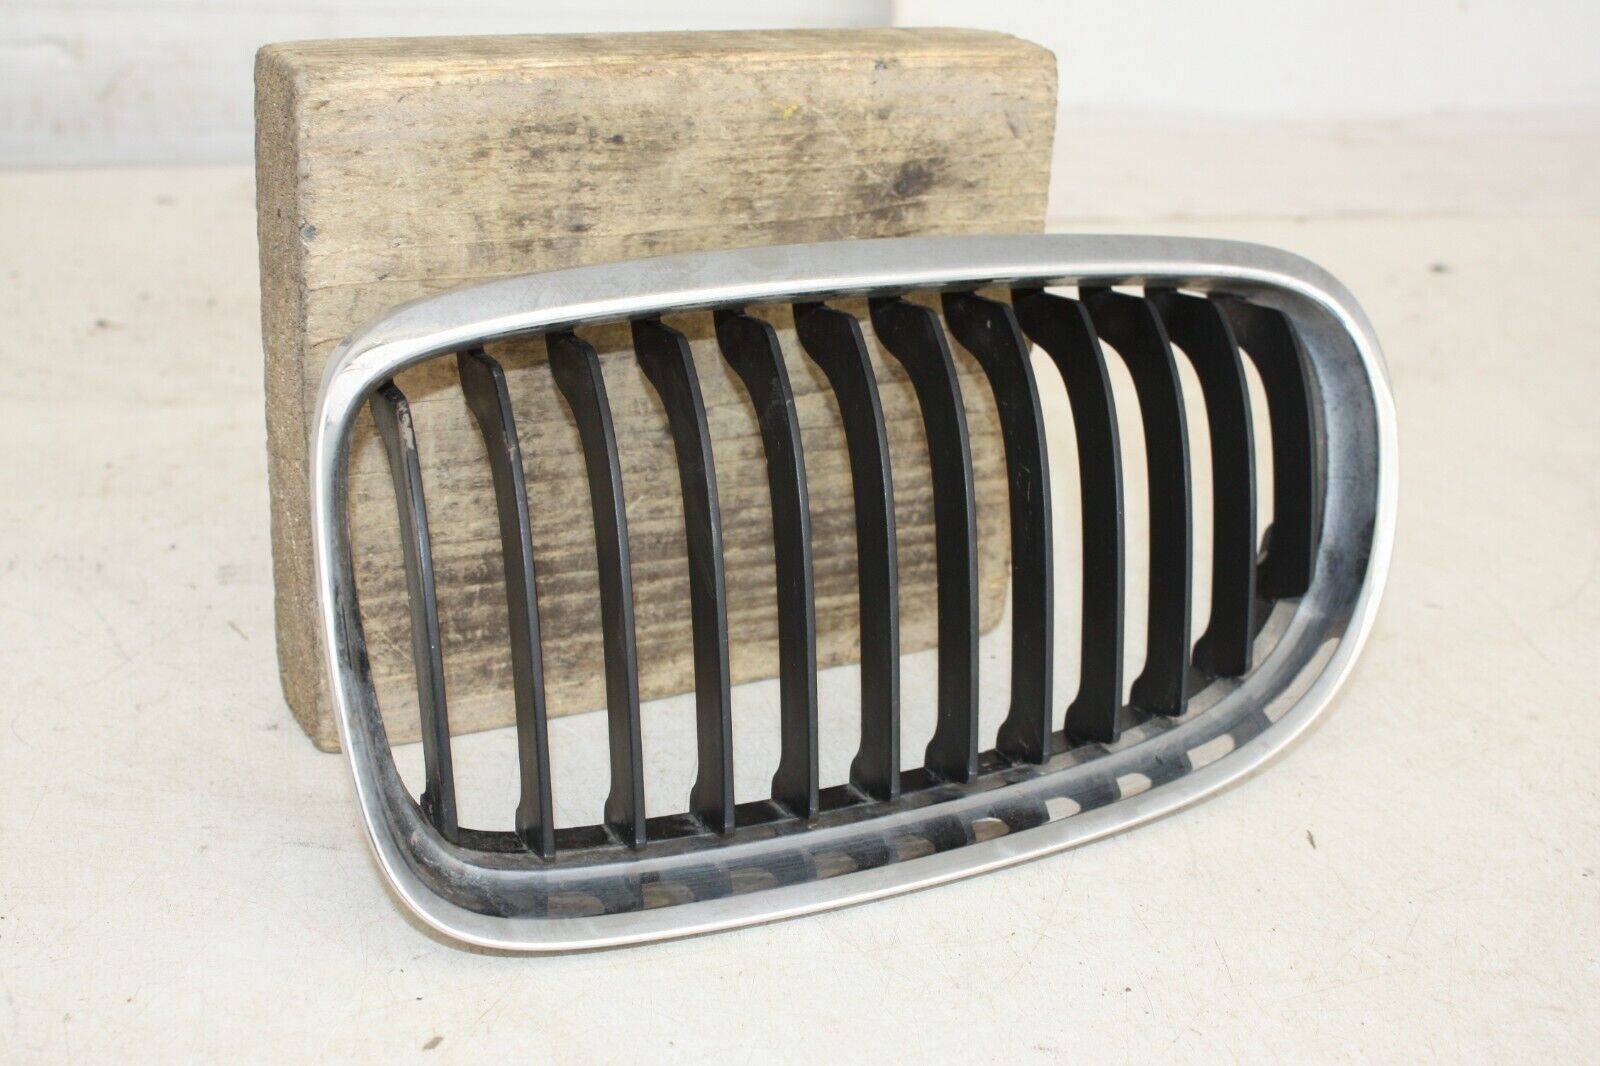 BMW-3-SERIES-FRONT-BUMPER-KIDNEY-GRILL-LEFT-2008-TO-2012-175367532000-4